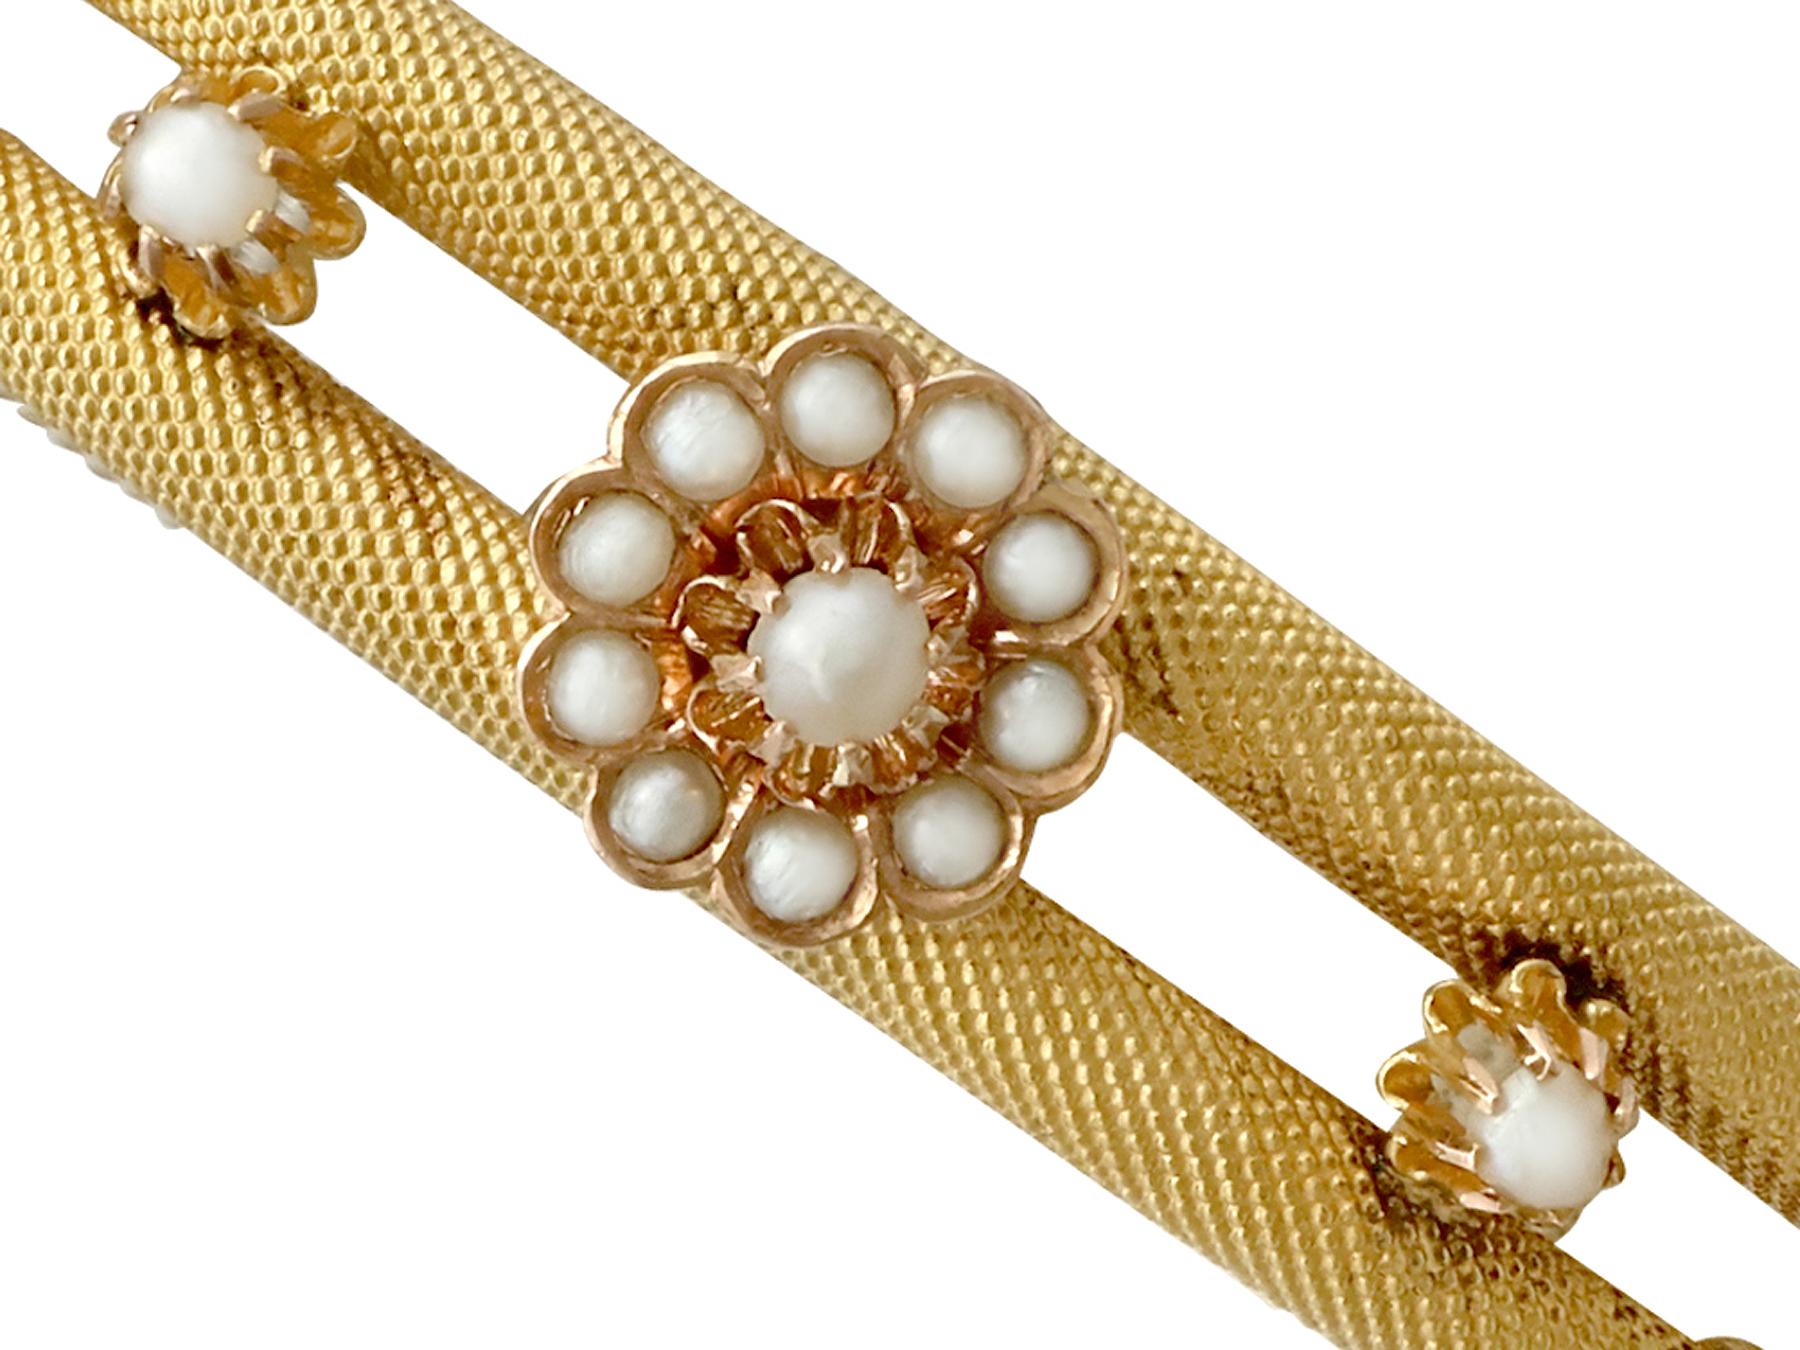 An exceptional, fine and impressive antique Victorian pearl and 22k yellow gold bangle; part of our antique jewelry and estate jewelry collections

This exceptional, fine and impressive antique bangle has been crafted in 22k yellow gold.

The body